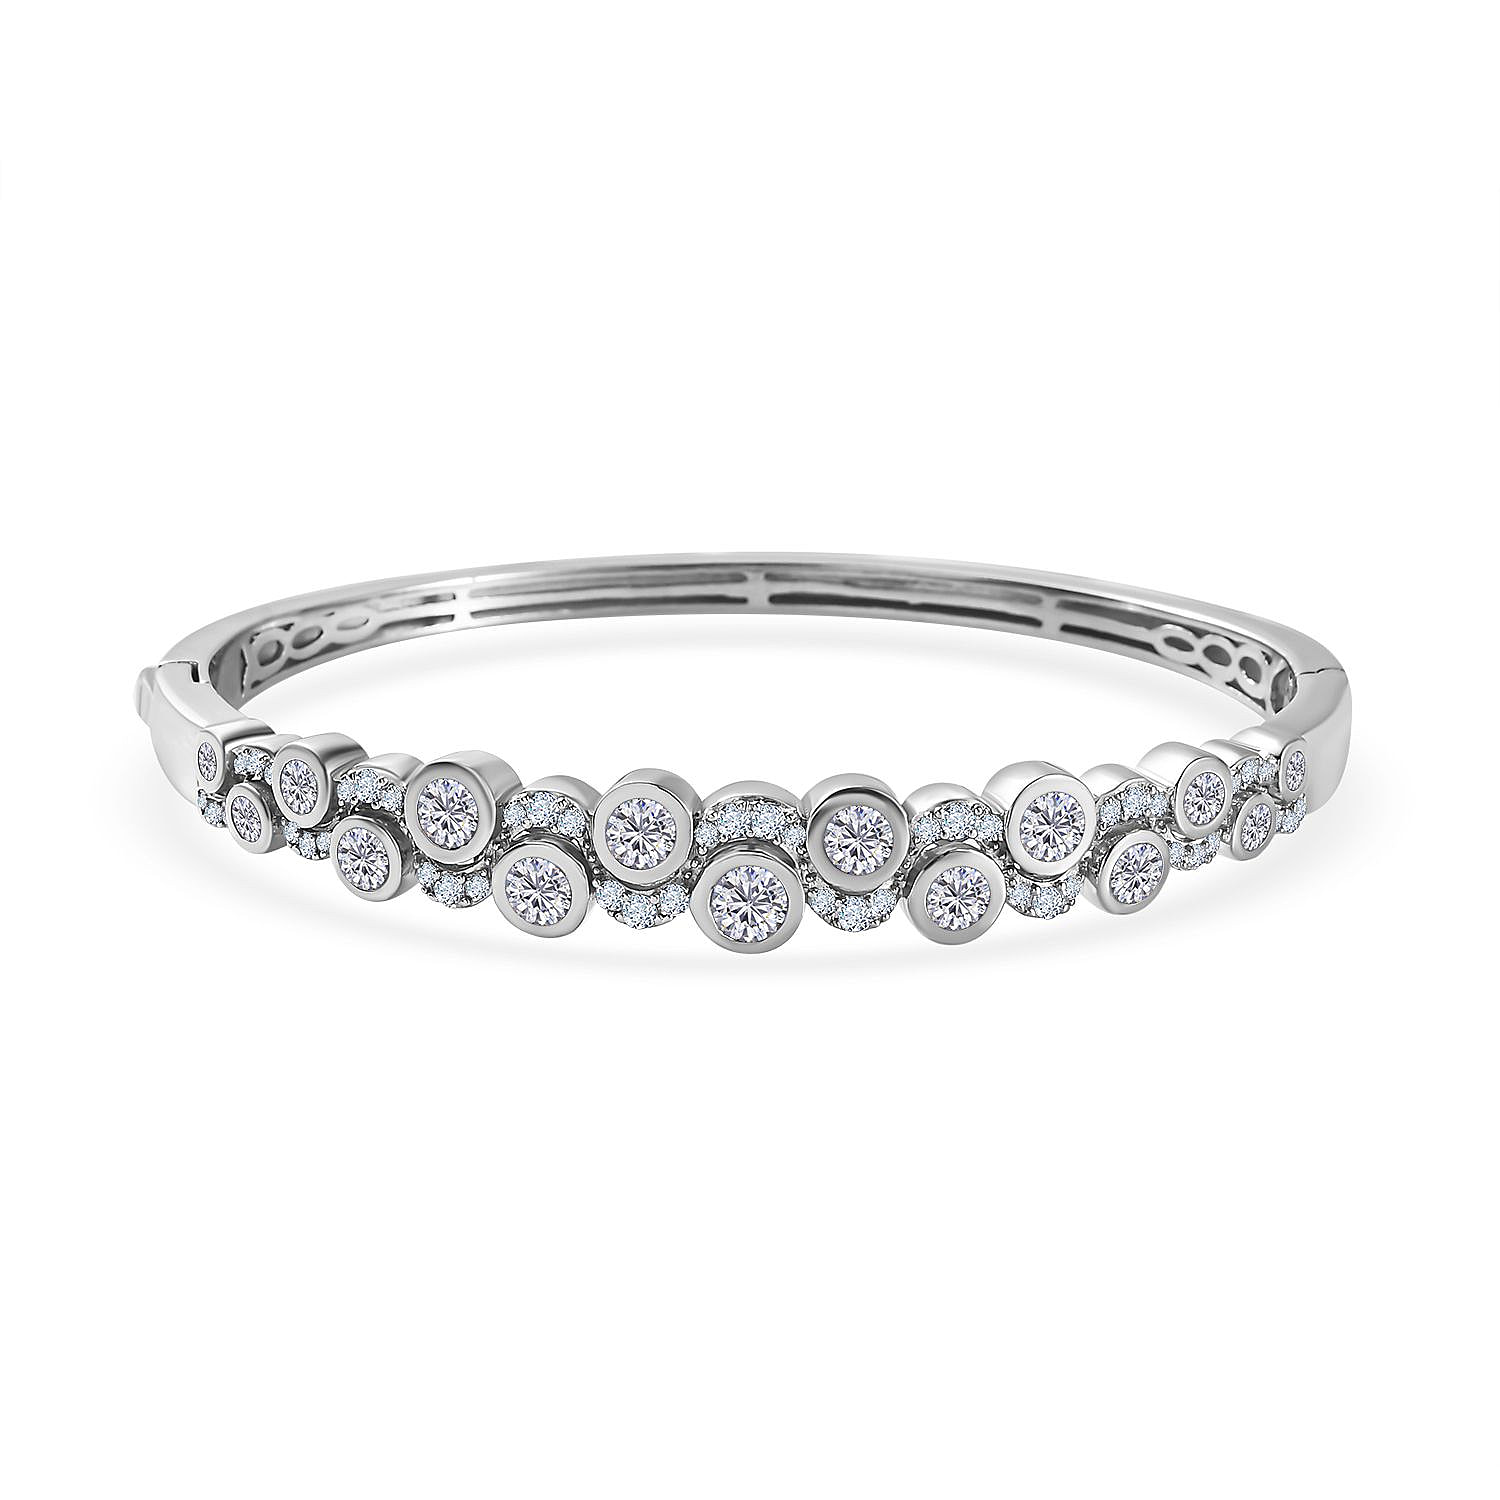 Moissanite Bubble Openable Bangle in Platinum Overlay Sterling Silver 4.71 ct,  Silver Wt. 20 Gms  4.354  Ct.